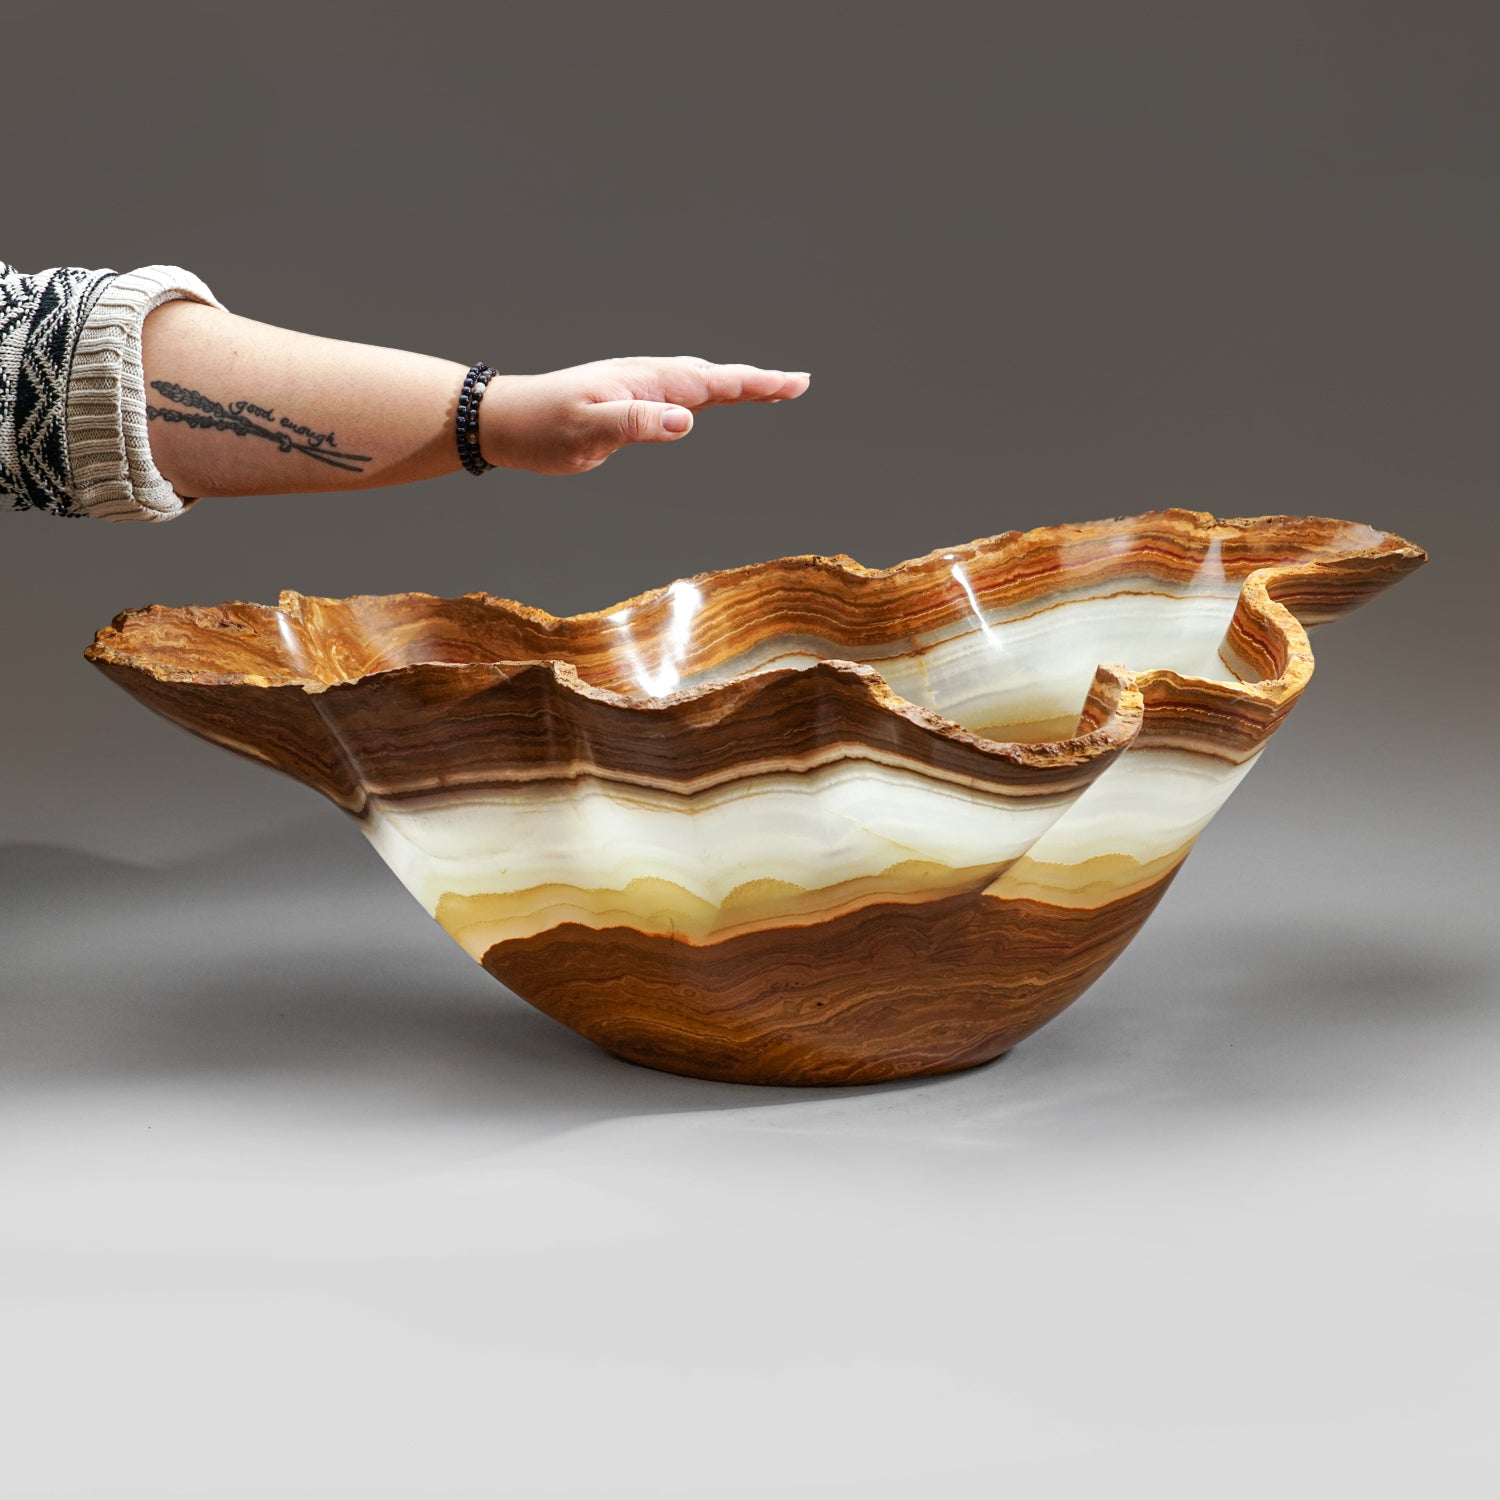 Genuine Polished Onyx Bowl From Mexico (30 lbs)